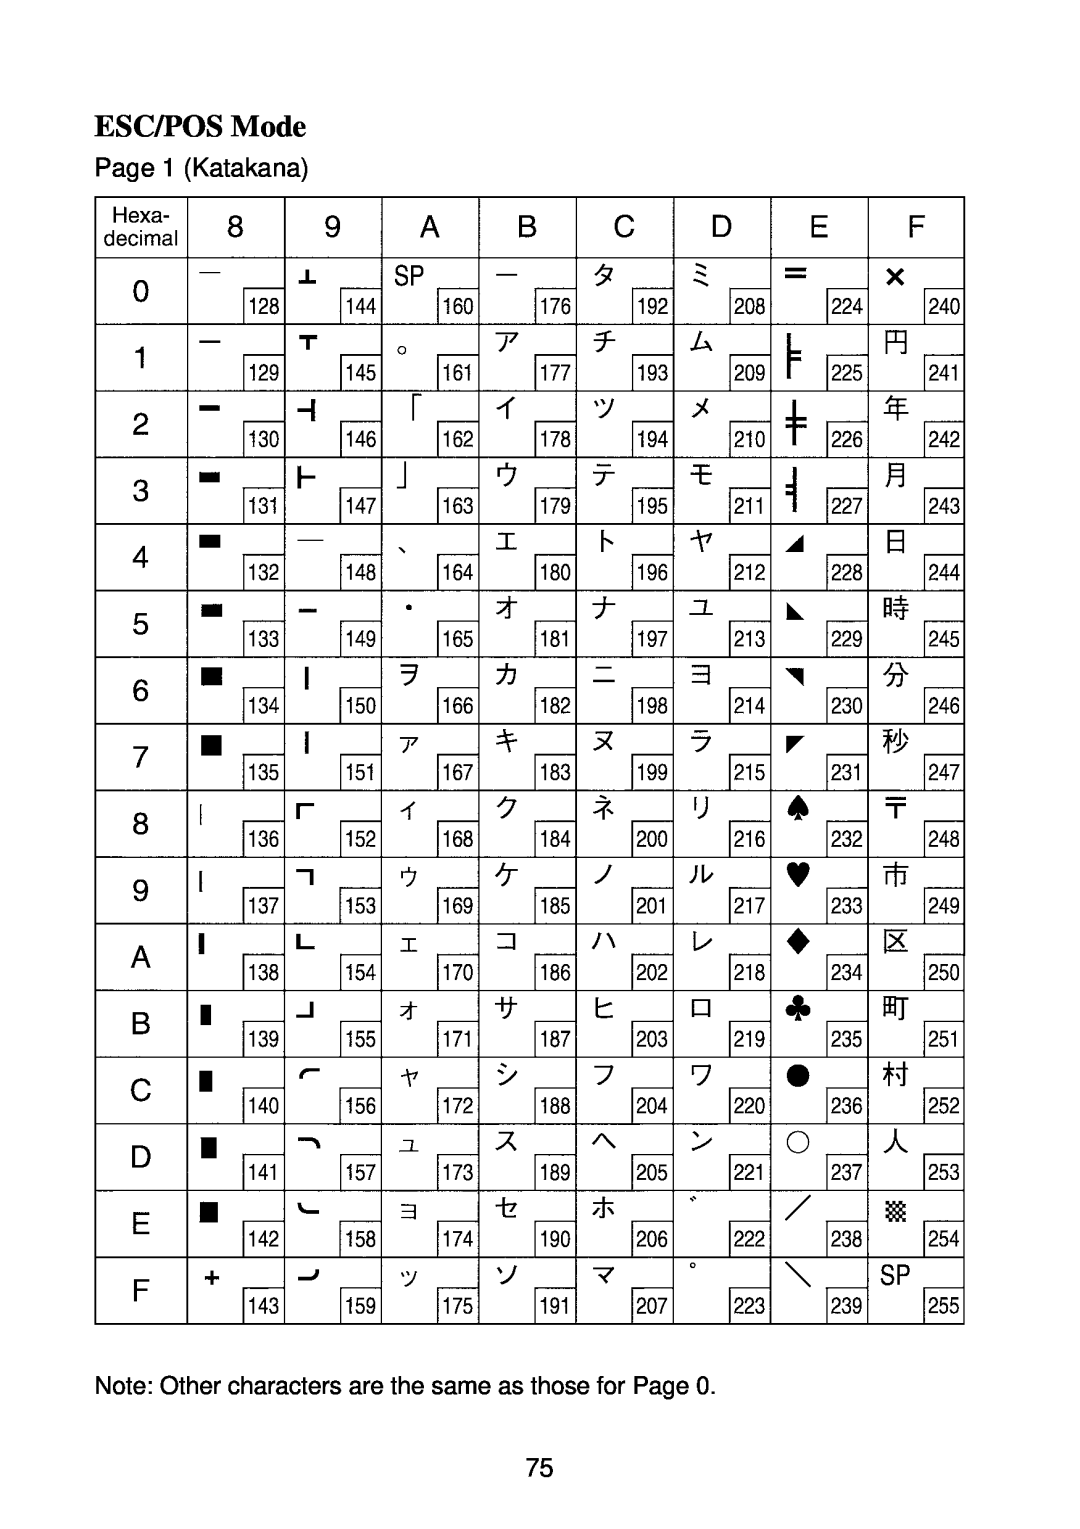 Star Micronics SP2000 manual Page 1 Katakana Note Other characters are the same as those for Page, ESC/POS Mode 